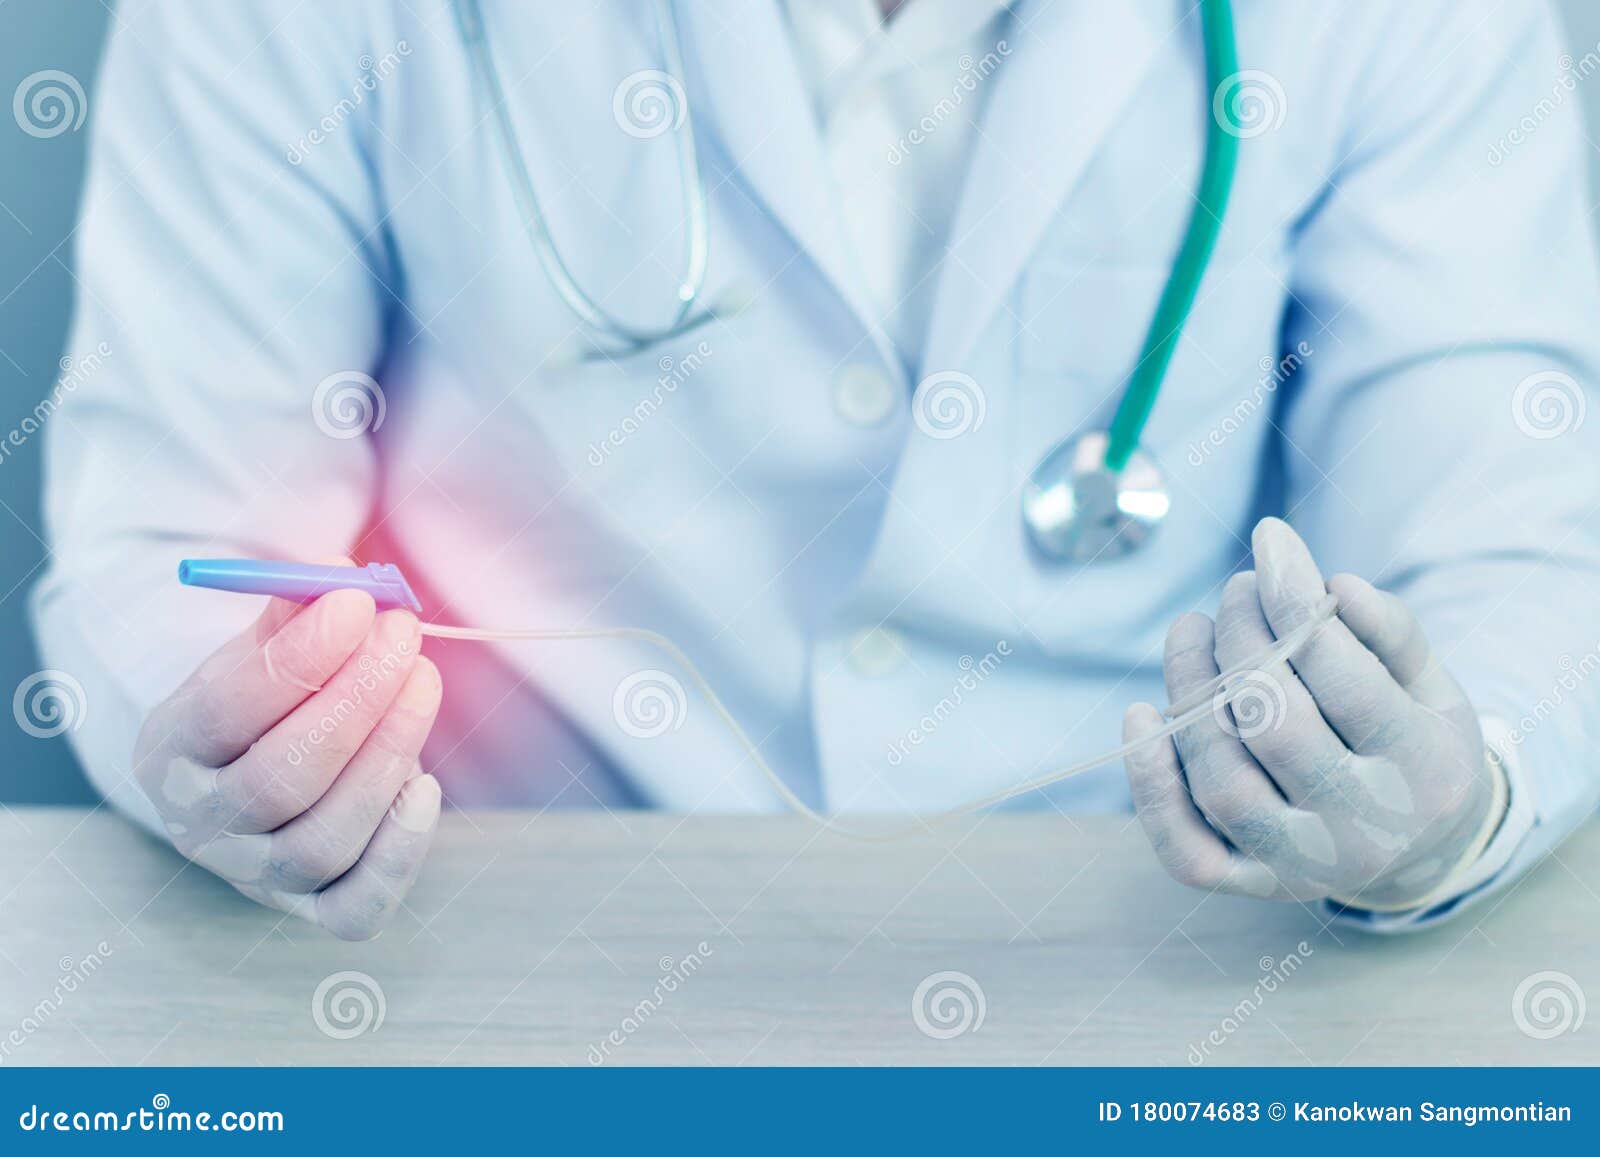 blue tone of hands and remedial catheter.